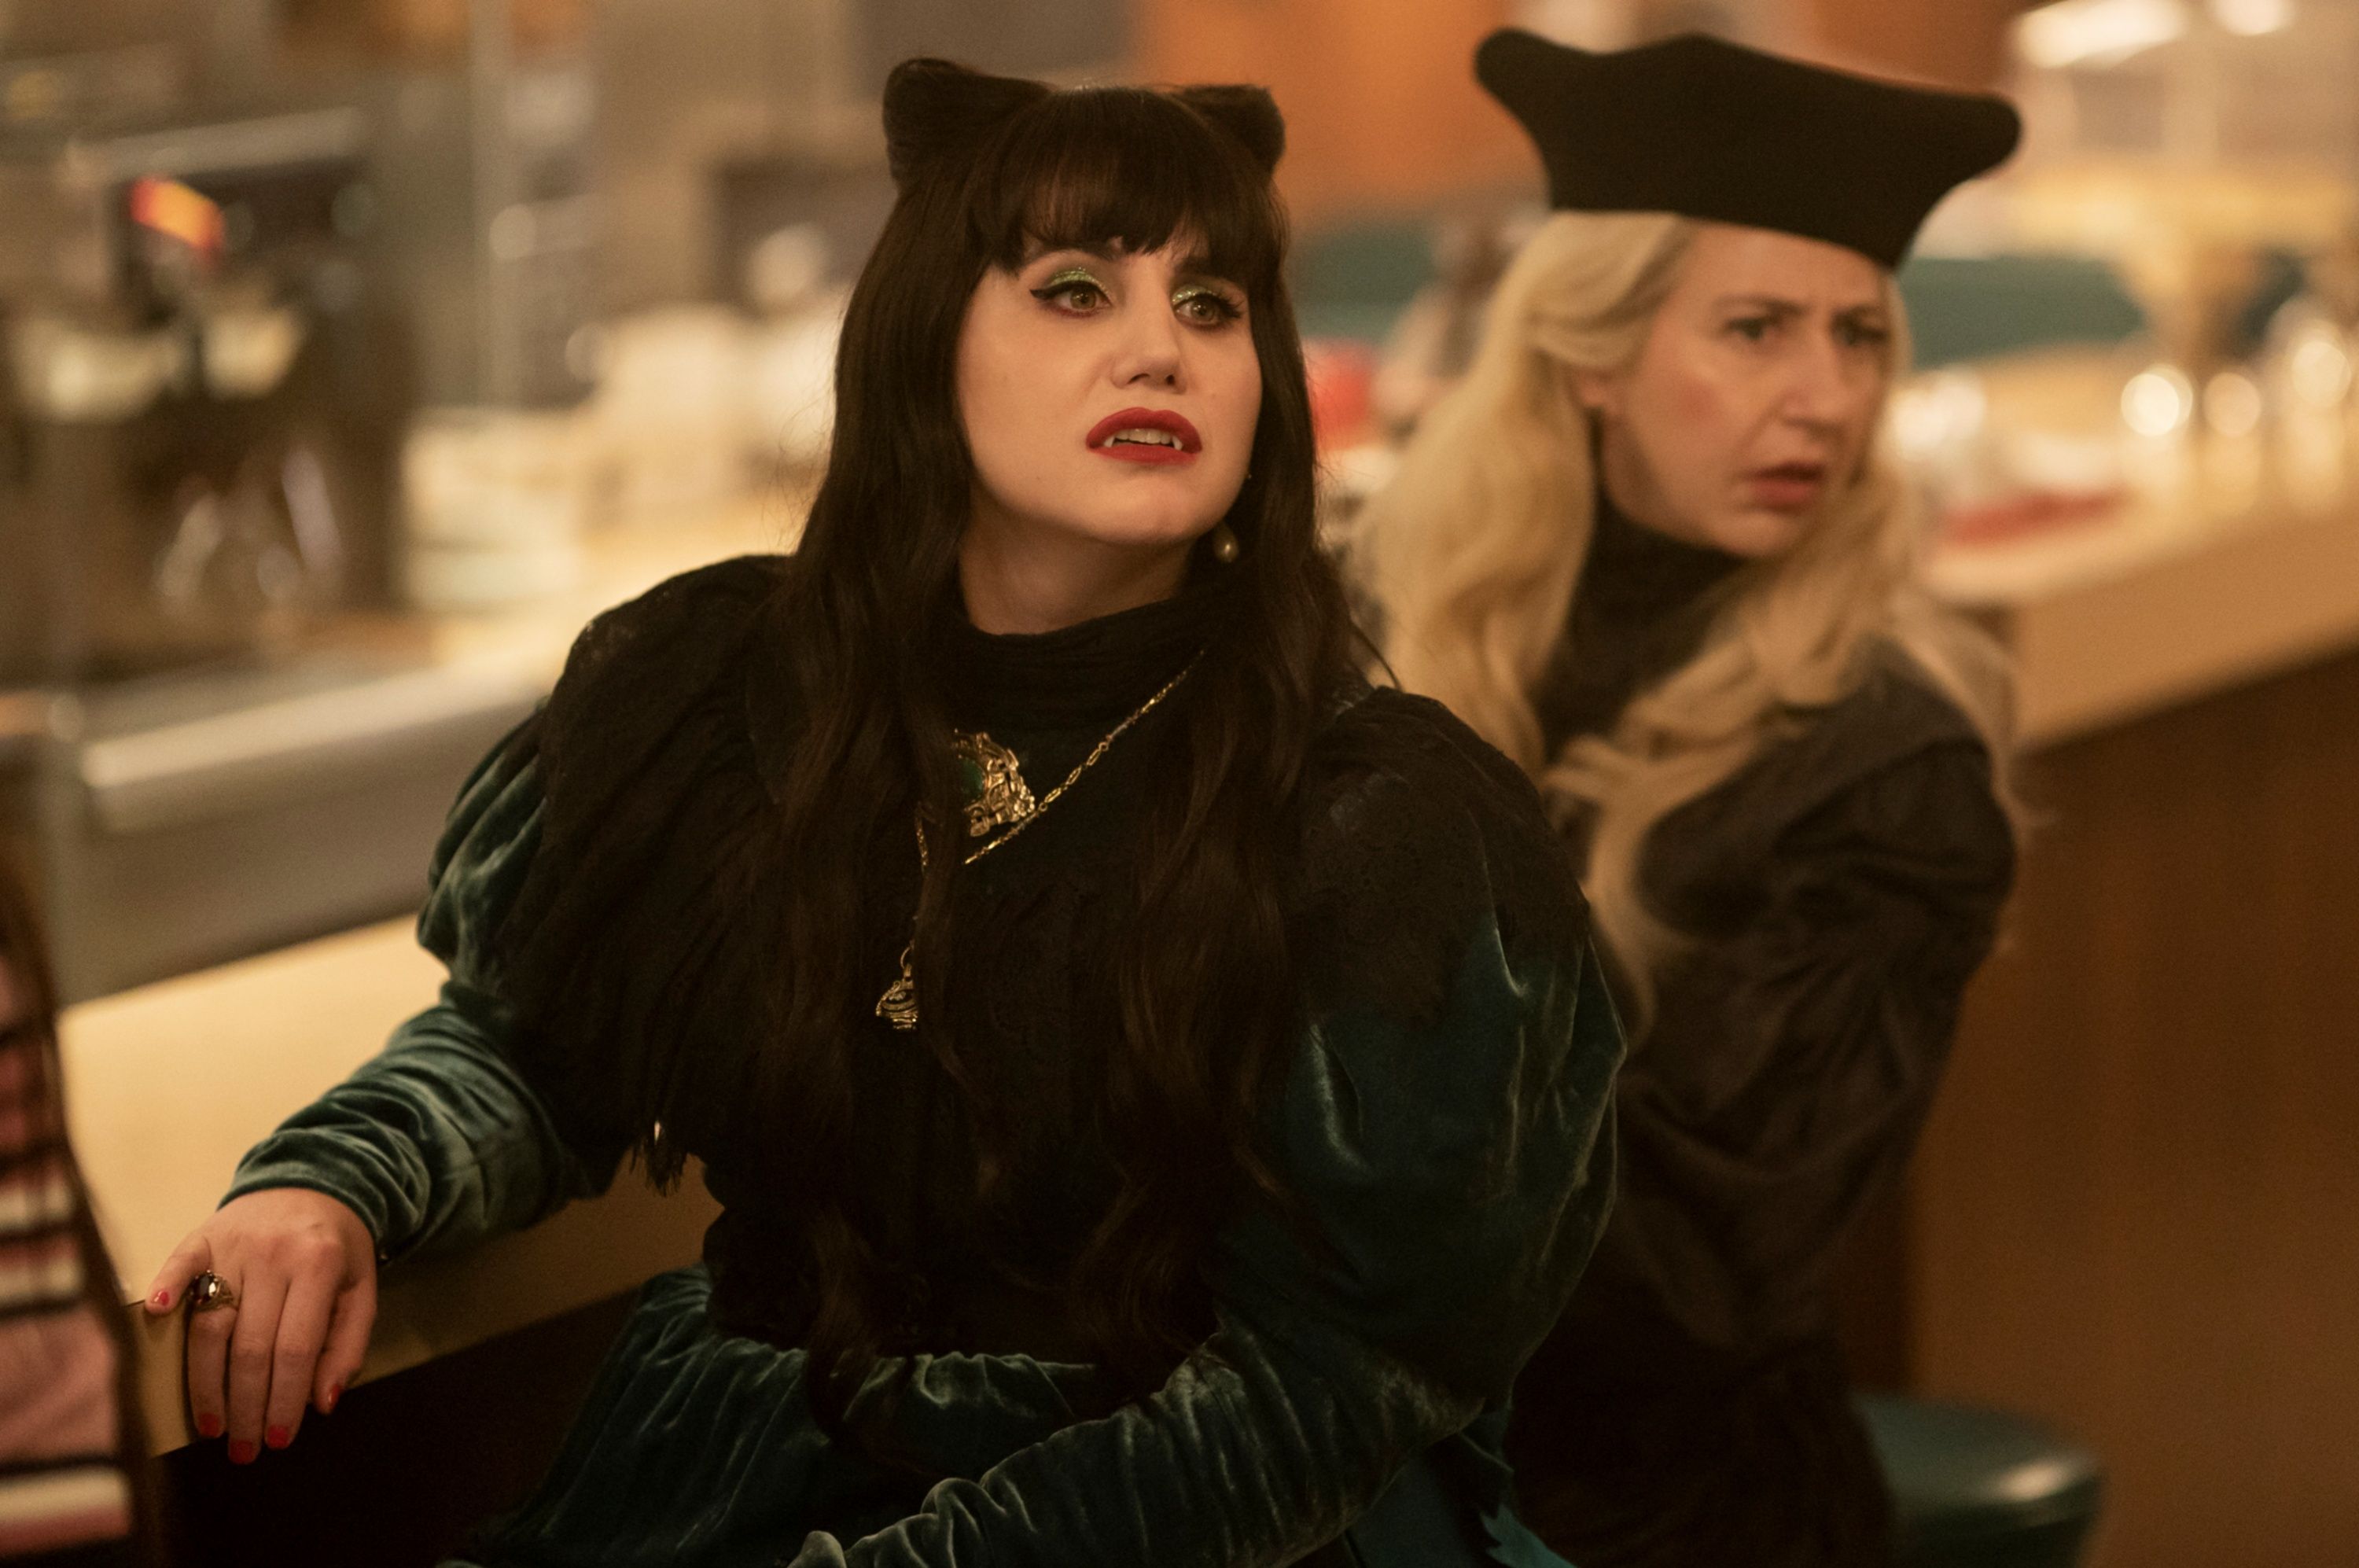 Kristen Schaal as Guide and Natasia Demetriou as Nadja in Season 5 of What We Do in the Shadows